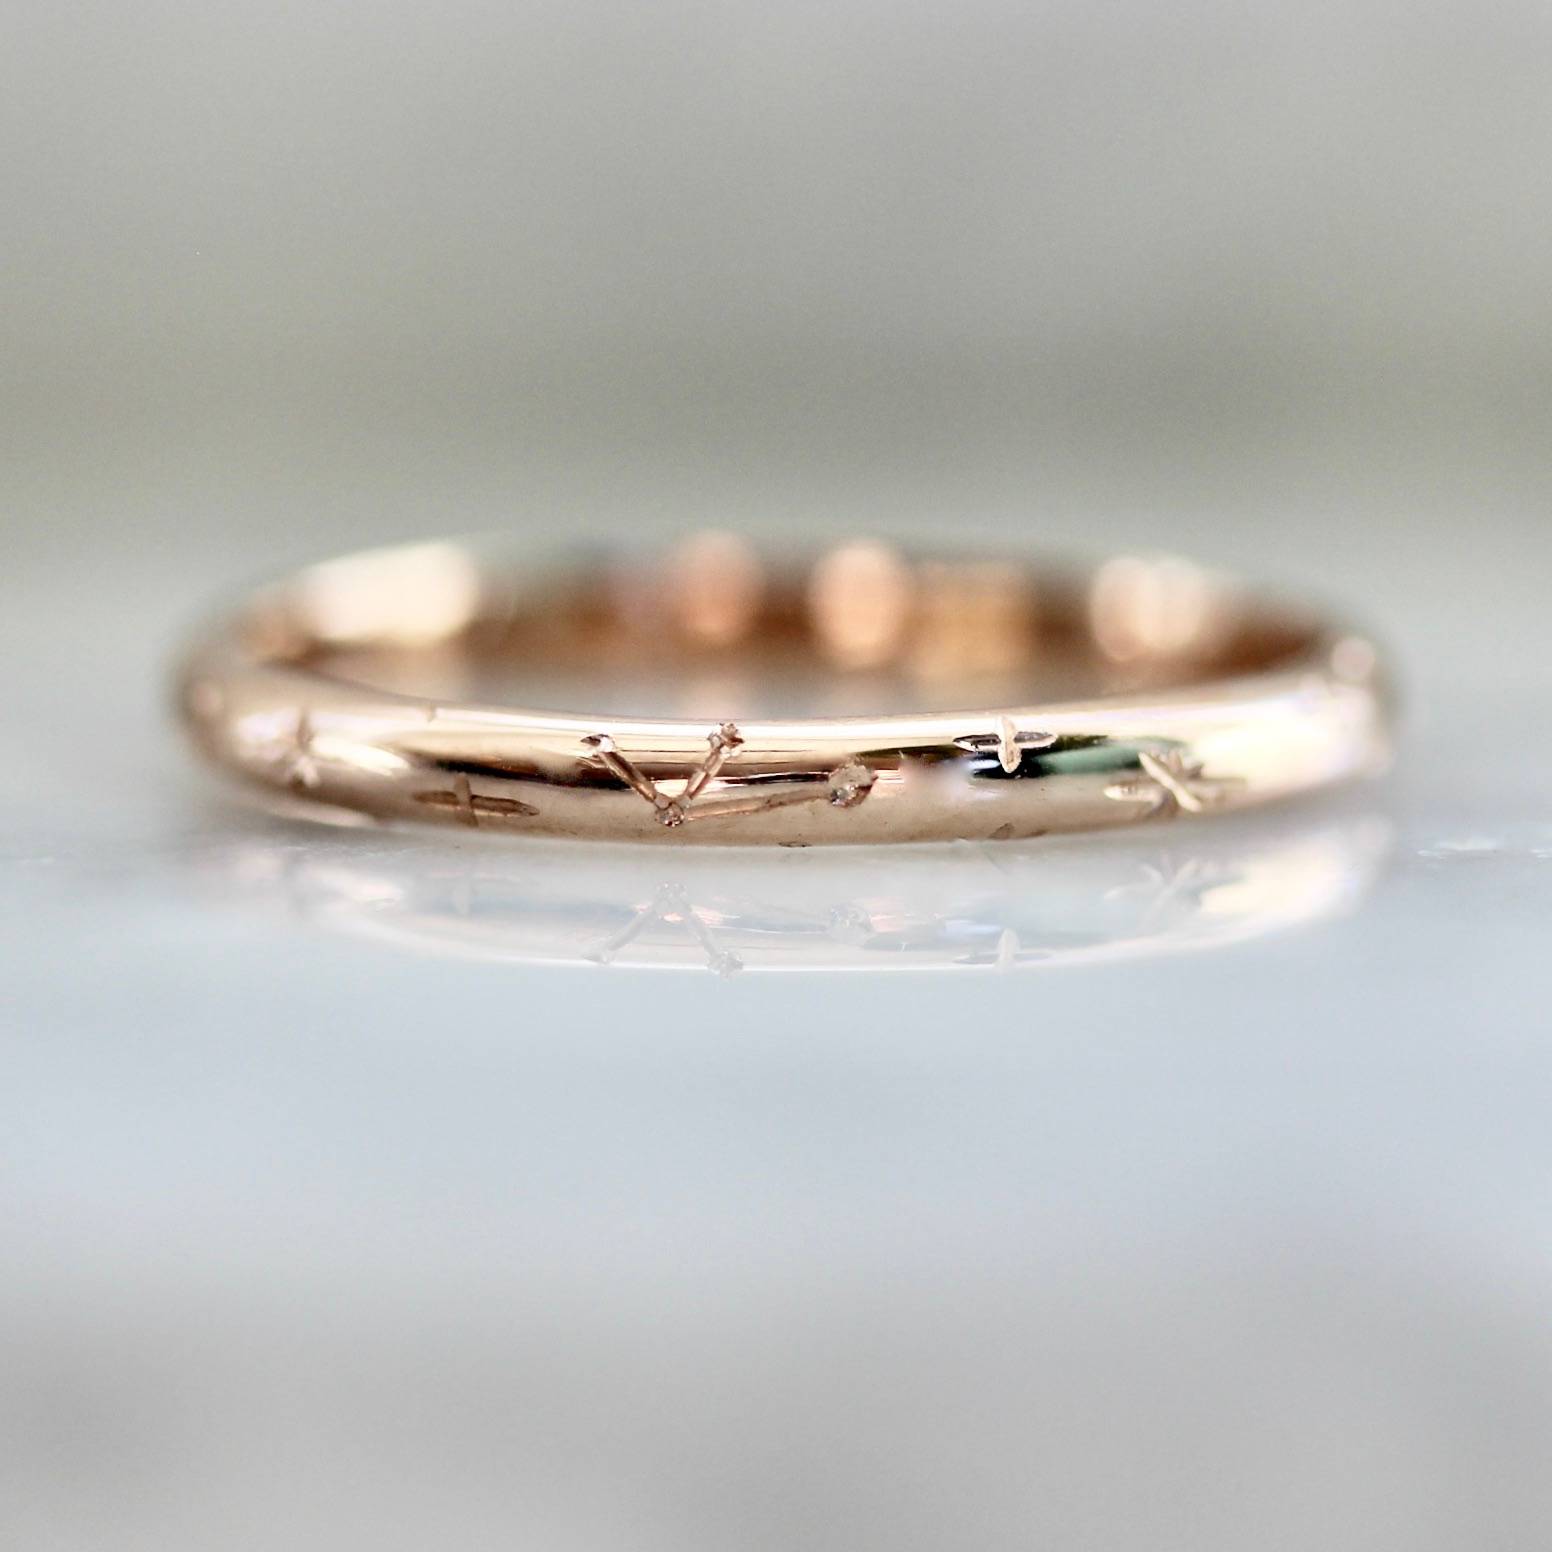 equinox moon and constellation engraved gold band